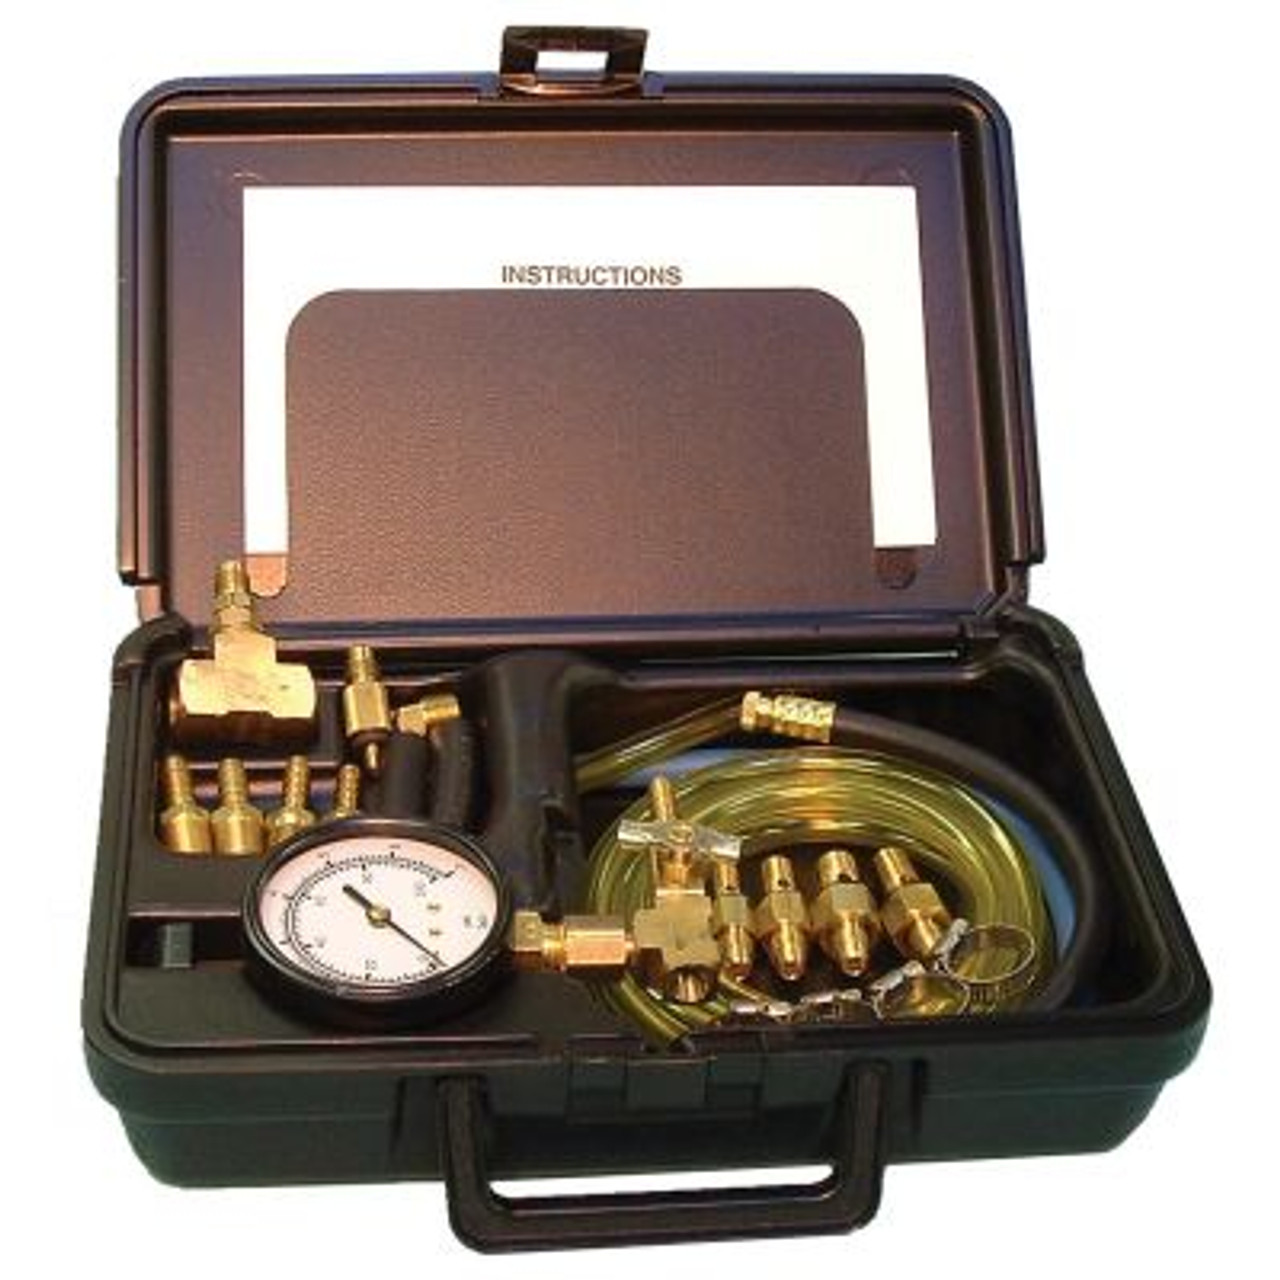 Multi-Port Fuel Injection Pressure Tester For Domestic And Foreign Vehicles In Molded Plastic Storage Case 36250